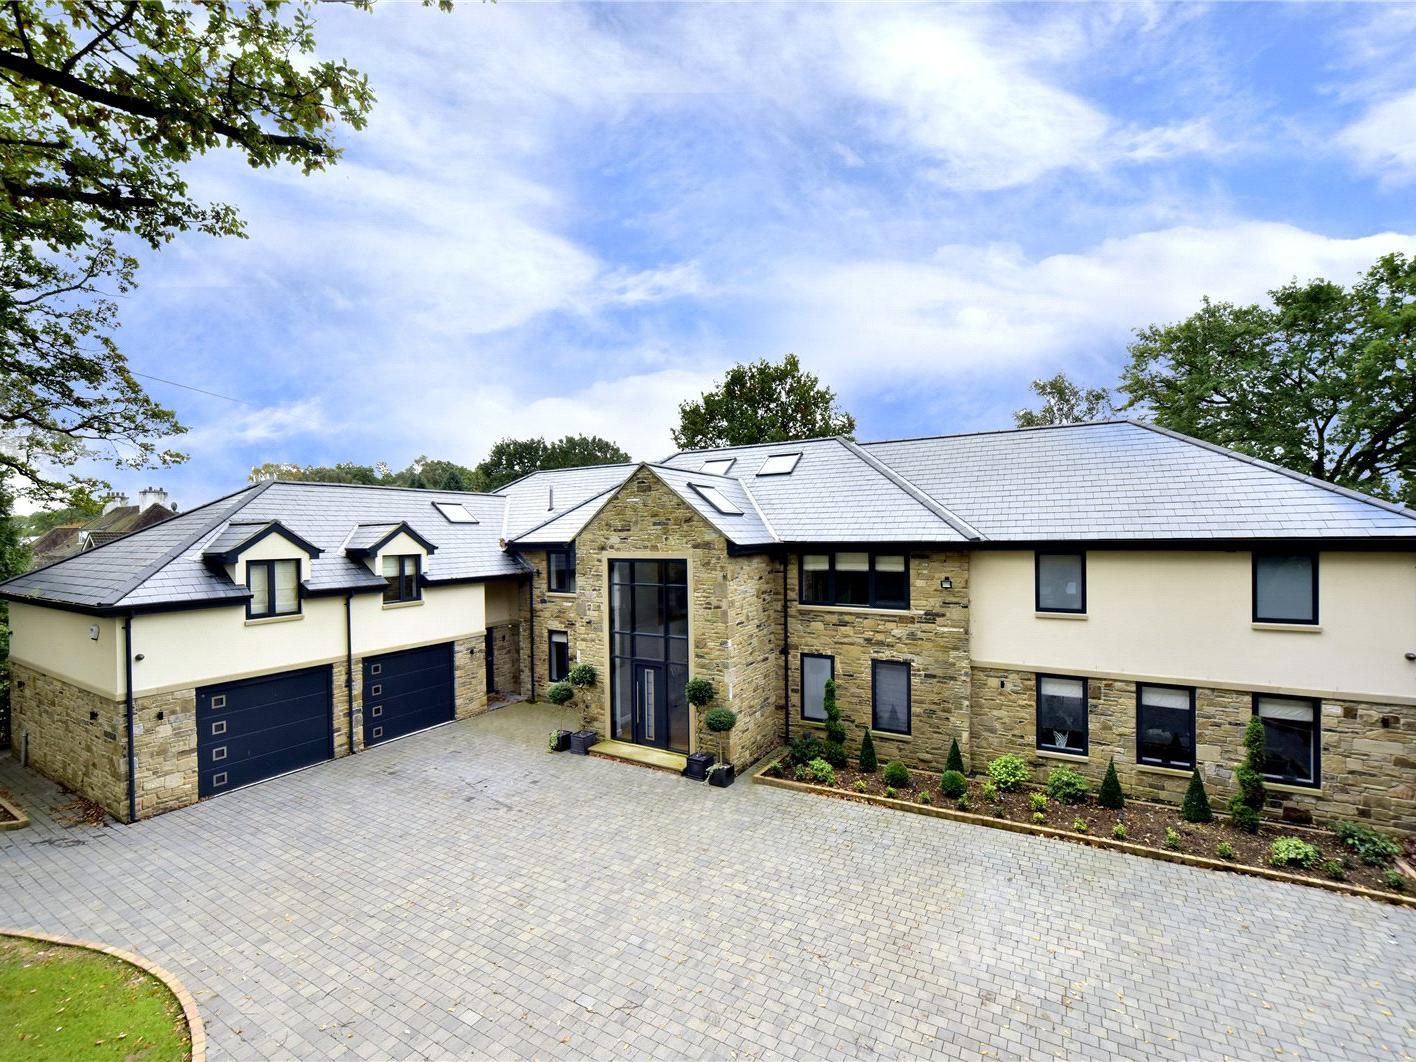 Hunts Land is a short drive from Wetherby, Harrogate, and Leeds city centre.